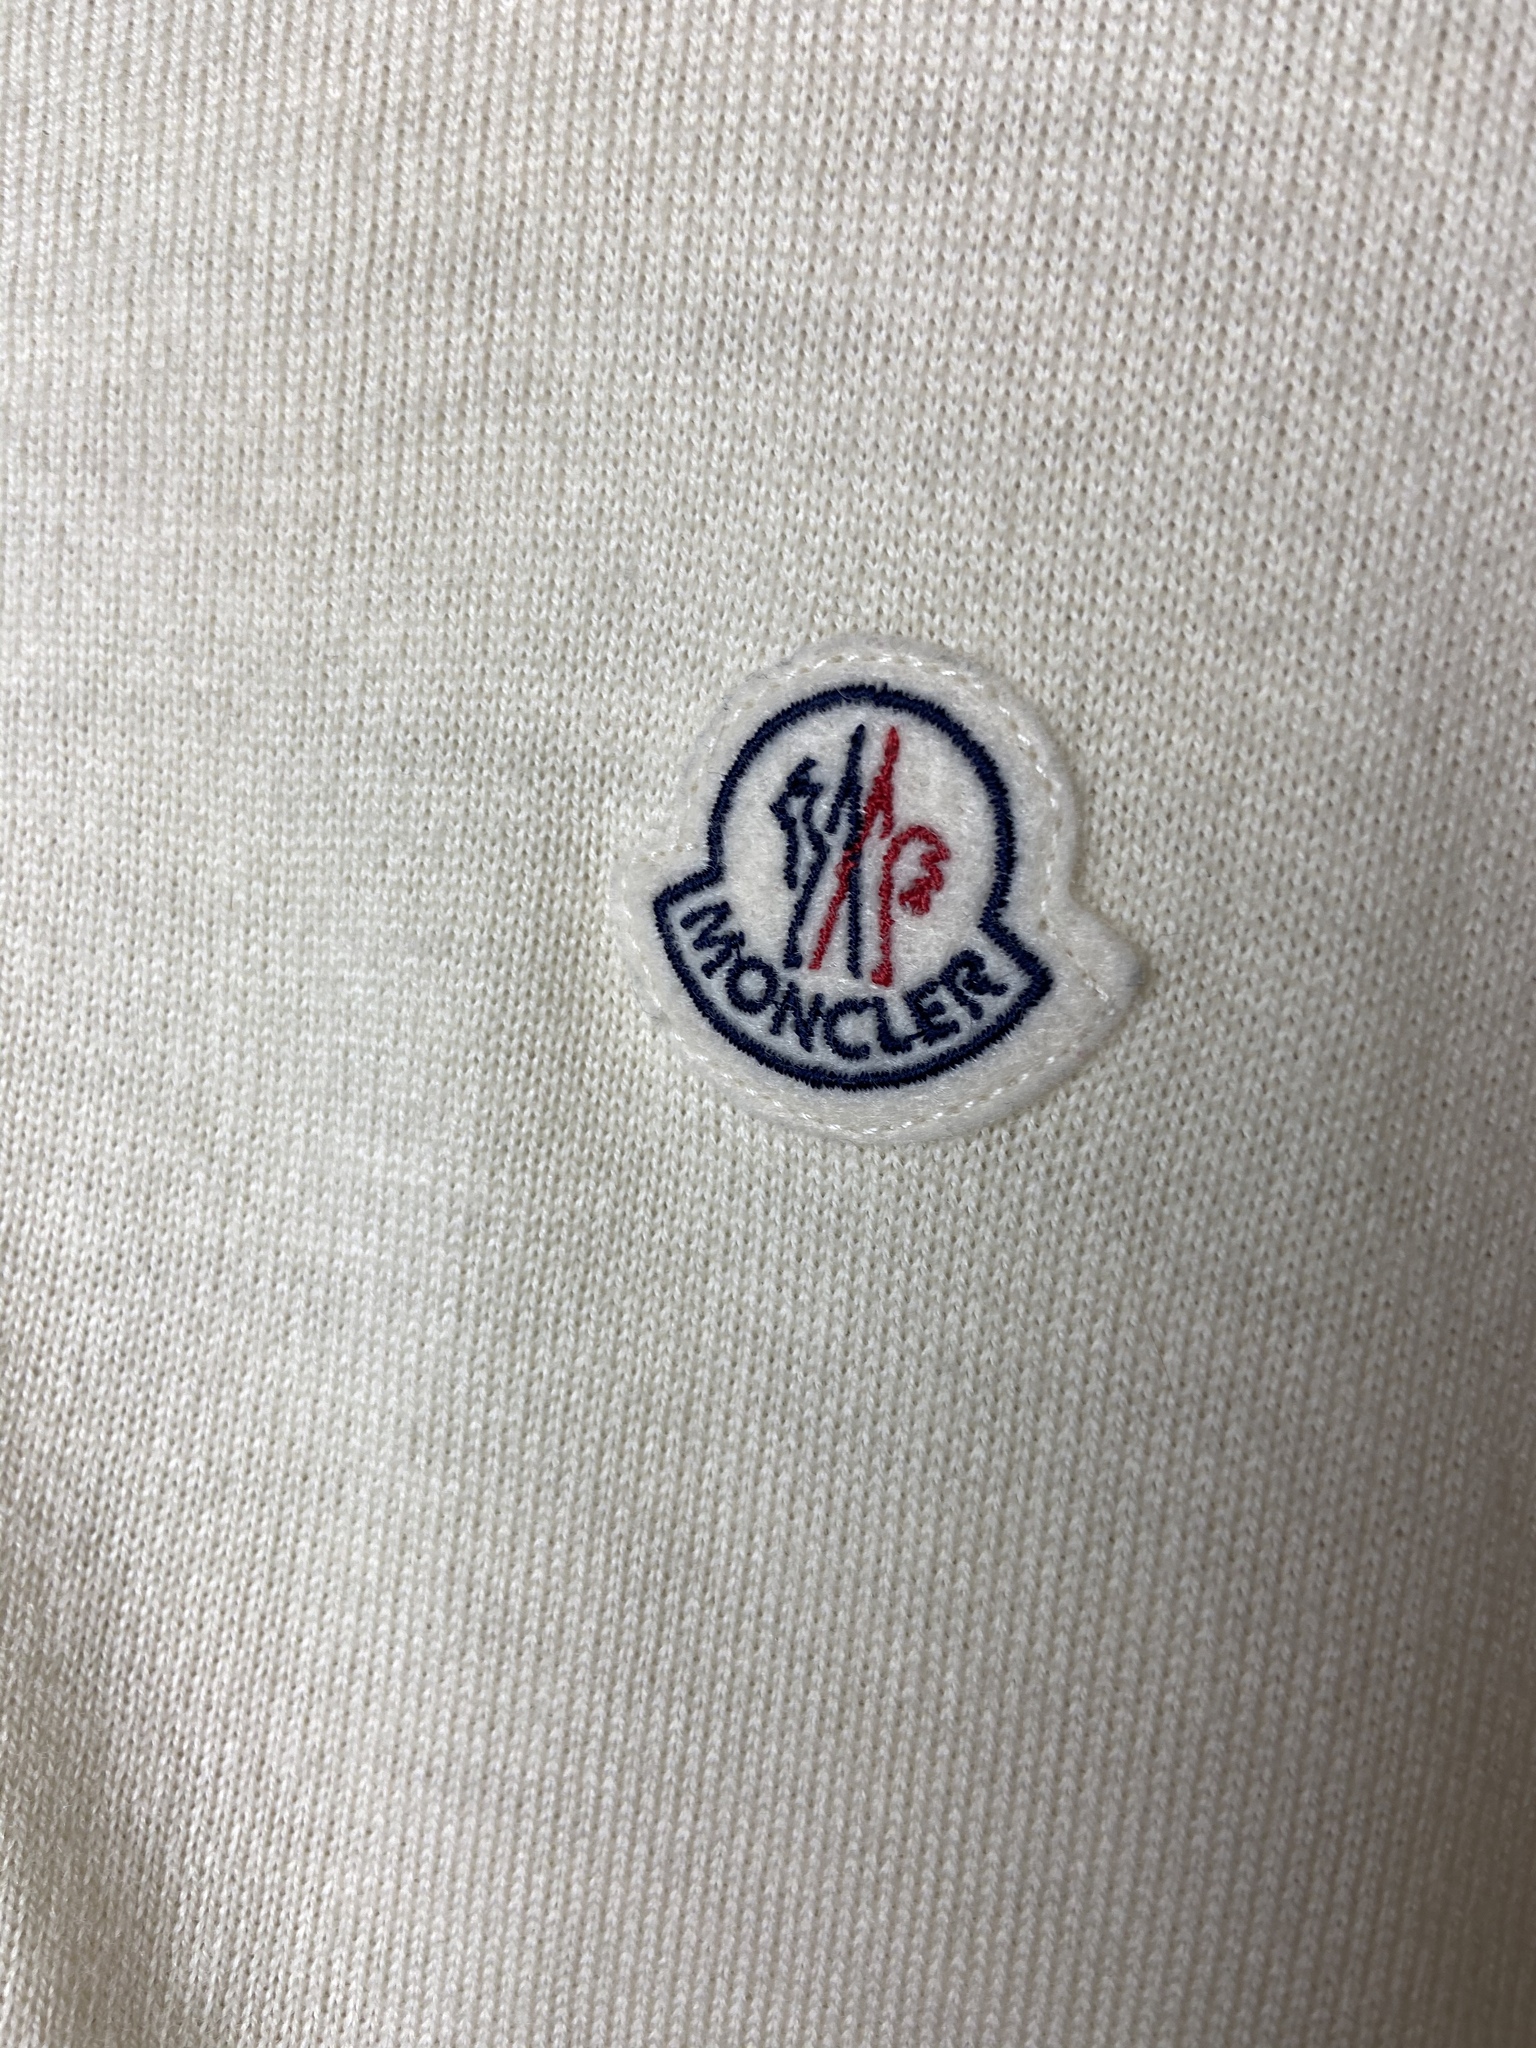 Moncler Track Top